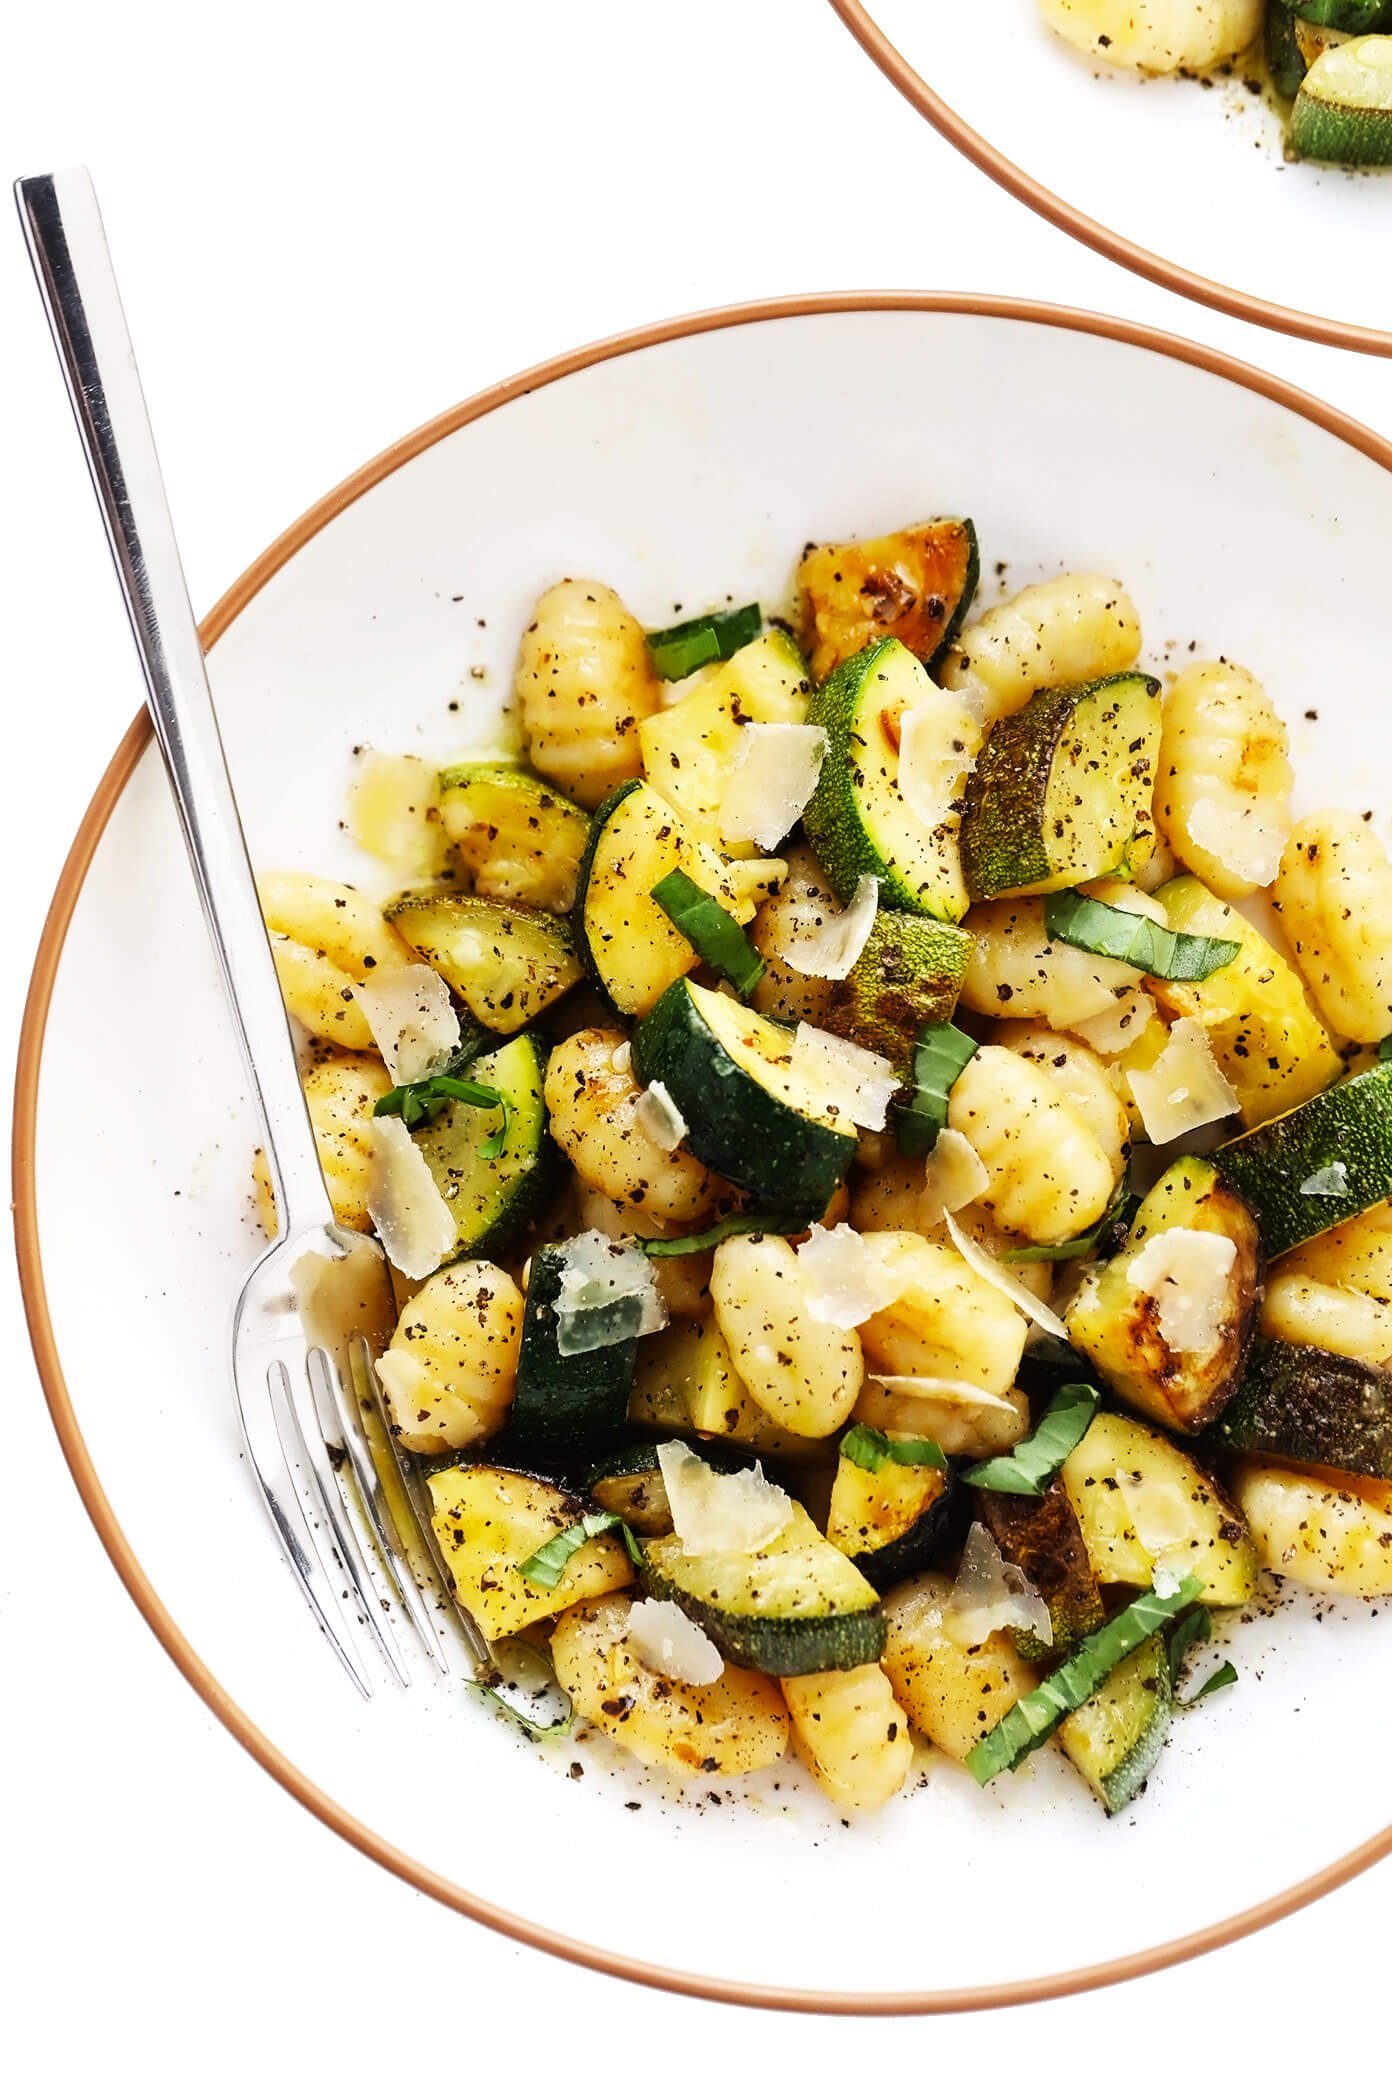 Lemon Basil Gnocchi with Zucchini in Serving Bowl